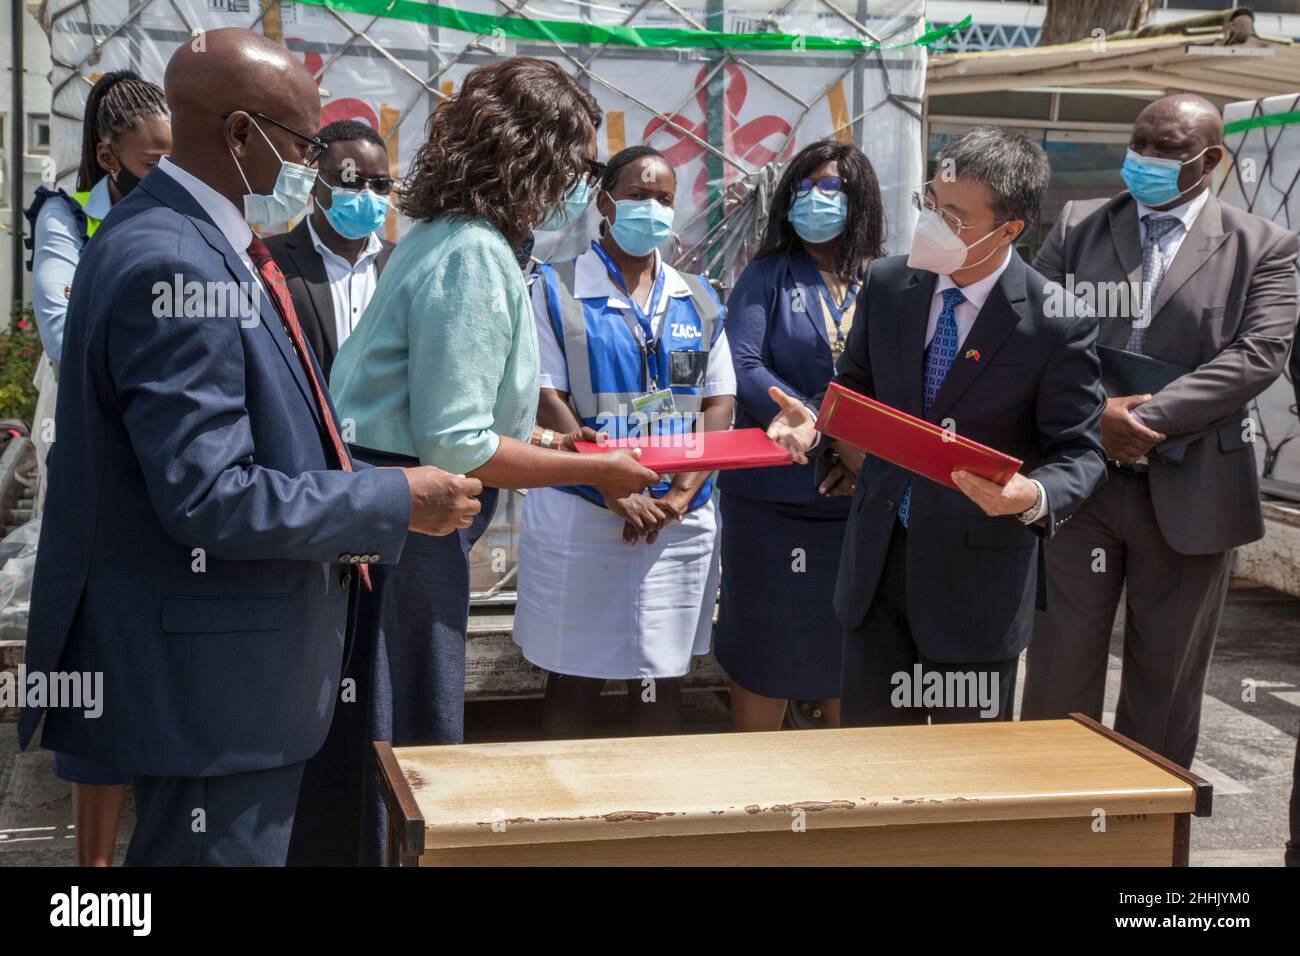 Lusaka, Zambia. 24th Jan, 2022. Zambian Health Minister Sylvia Masebo (2nd L, Front) and Chinese Ambassador to Zambia Li Jie (1st R, Front) attend a ceremony for the arrival of China-donated COVID-19 vaccines at the Kenneth Kaunda International Airport in Lusaka, Zambia, on Jan. 24, 2022. Zambia on Monday received a fresh batch of COVID-19 vaccines donated by the Chinese government. Credit: Martin Mbangweta/Xinhua/Alamy Live News Stock Photo